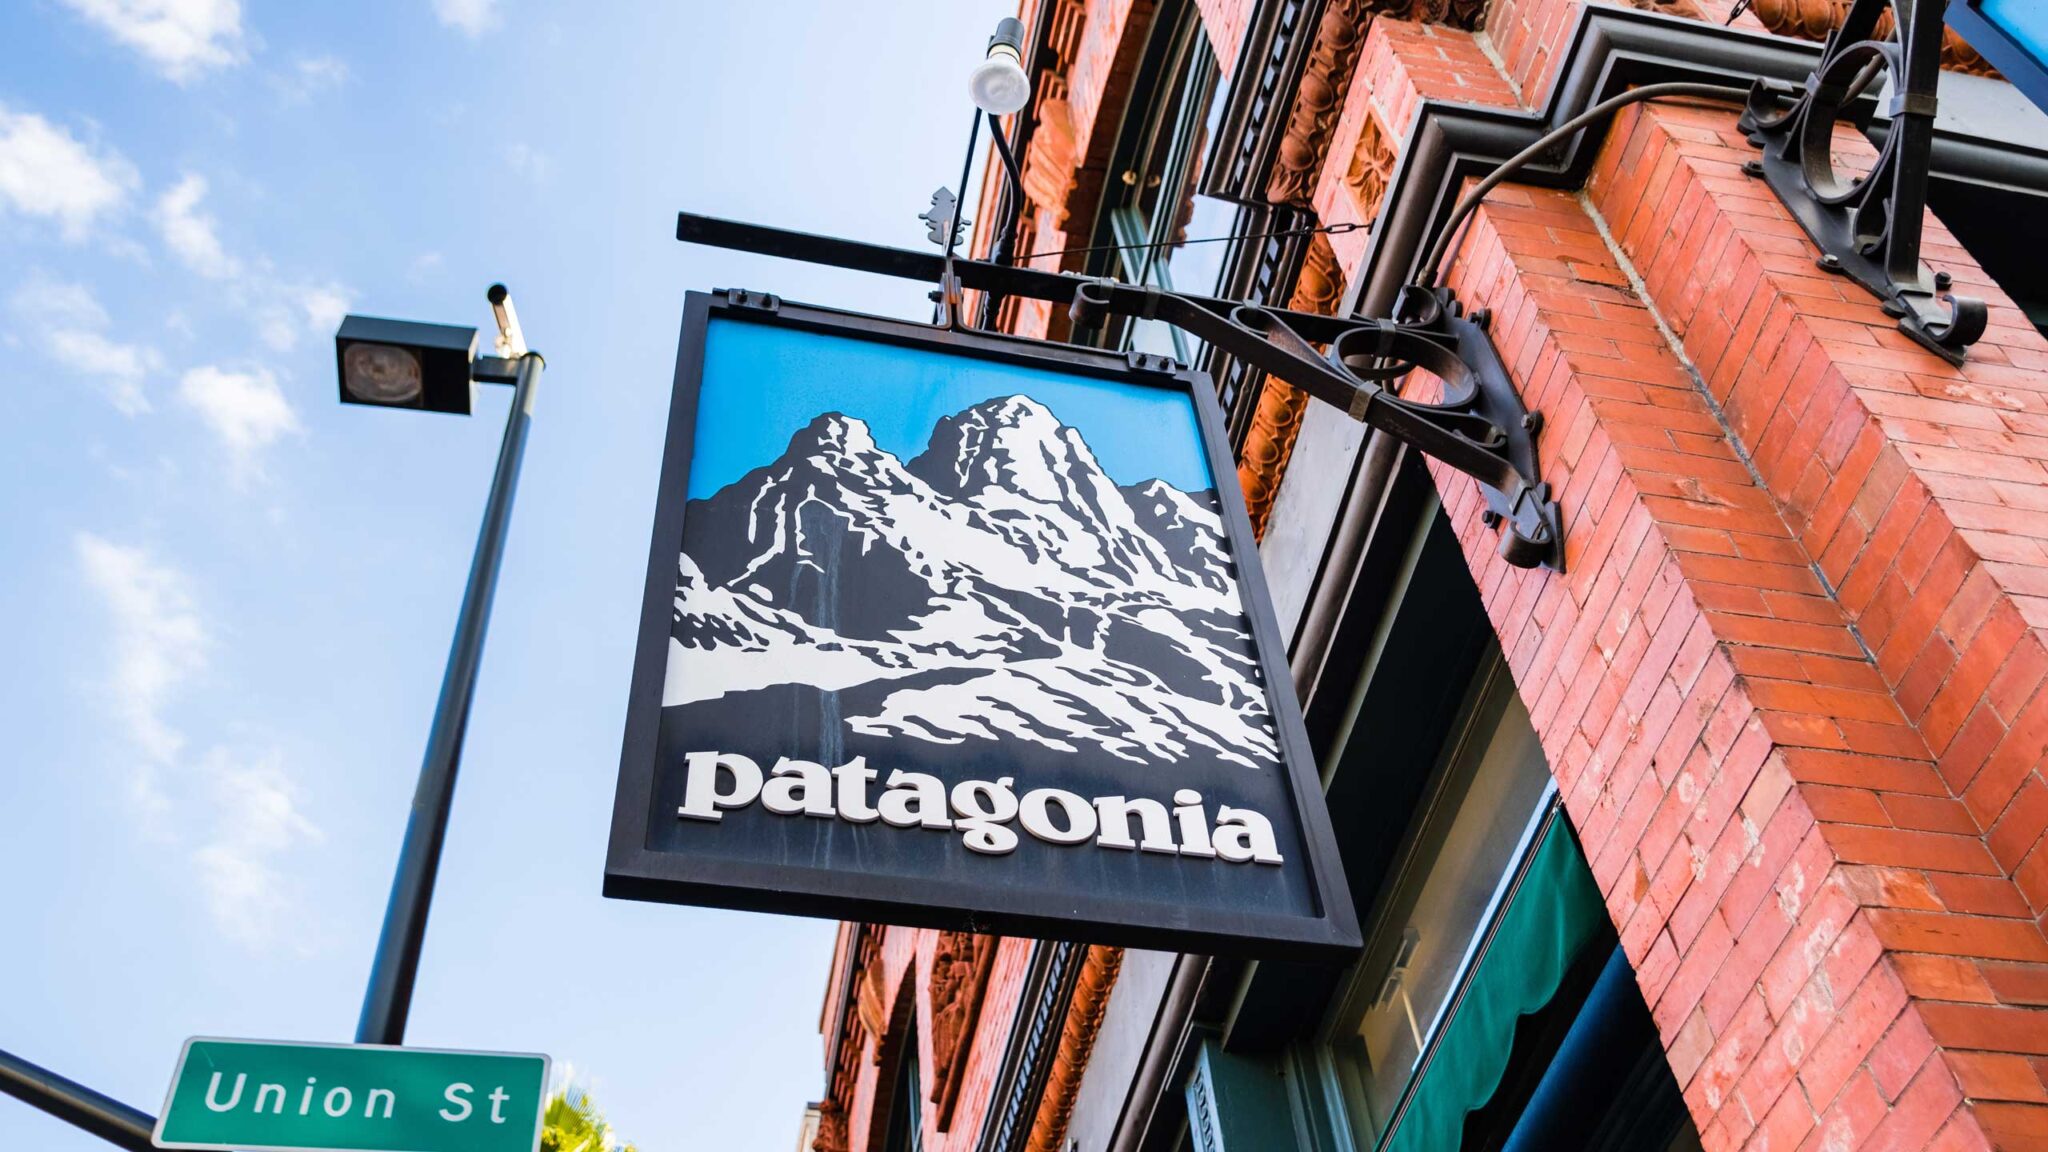 Marketing Strategies and Brand Campaigns of Patagonia